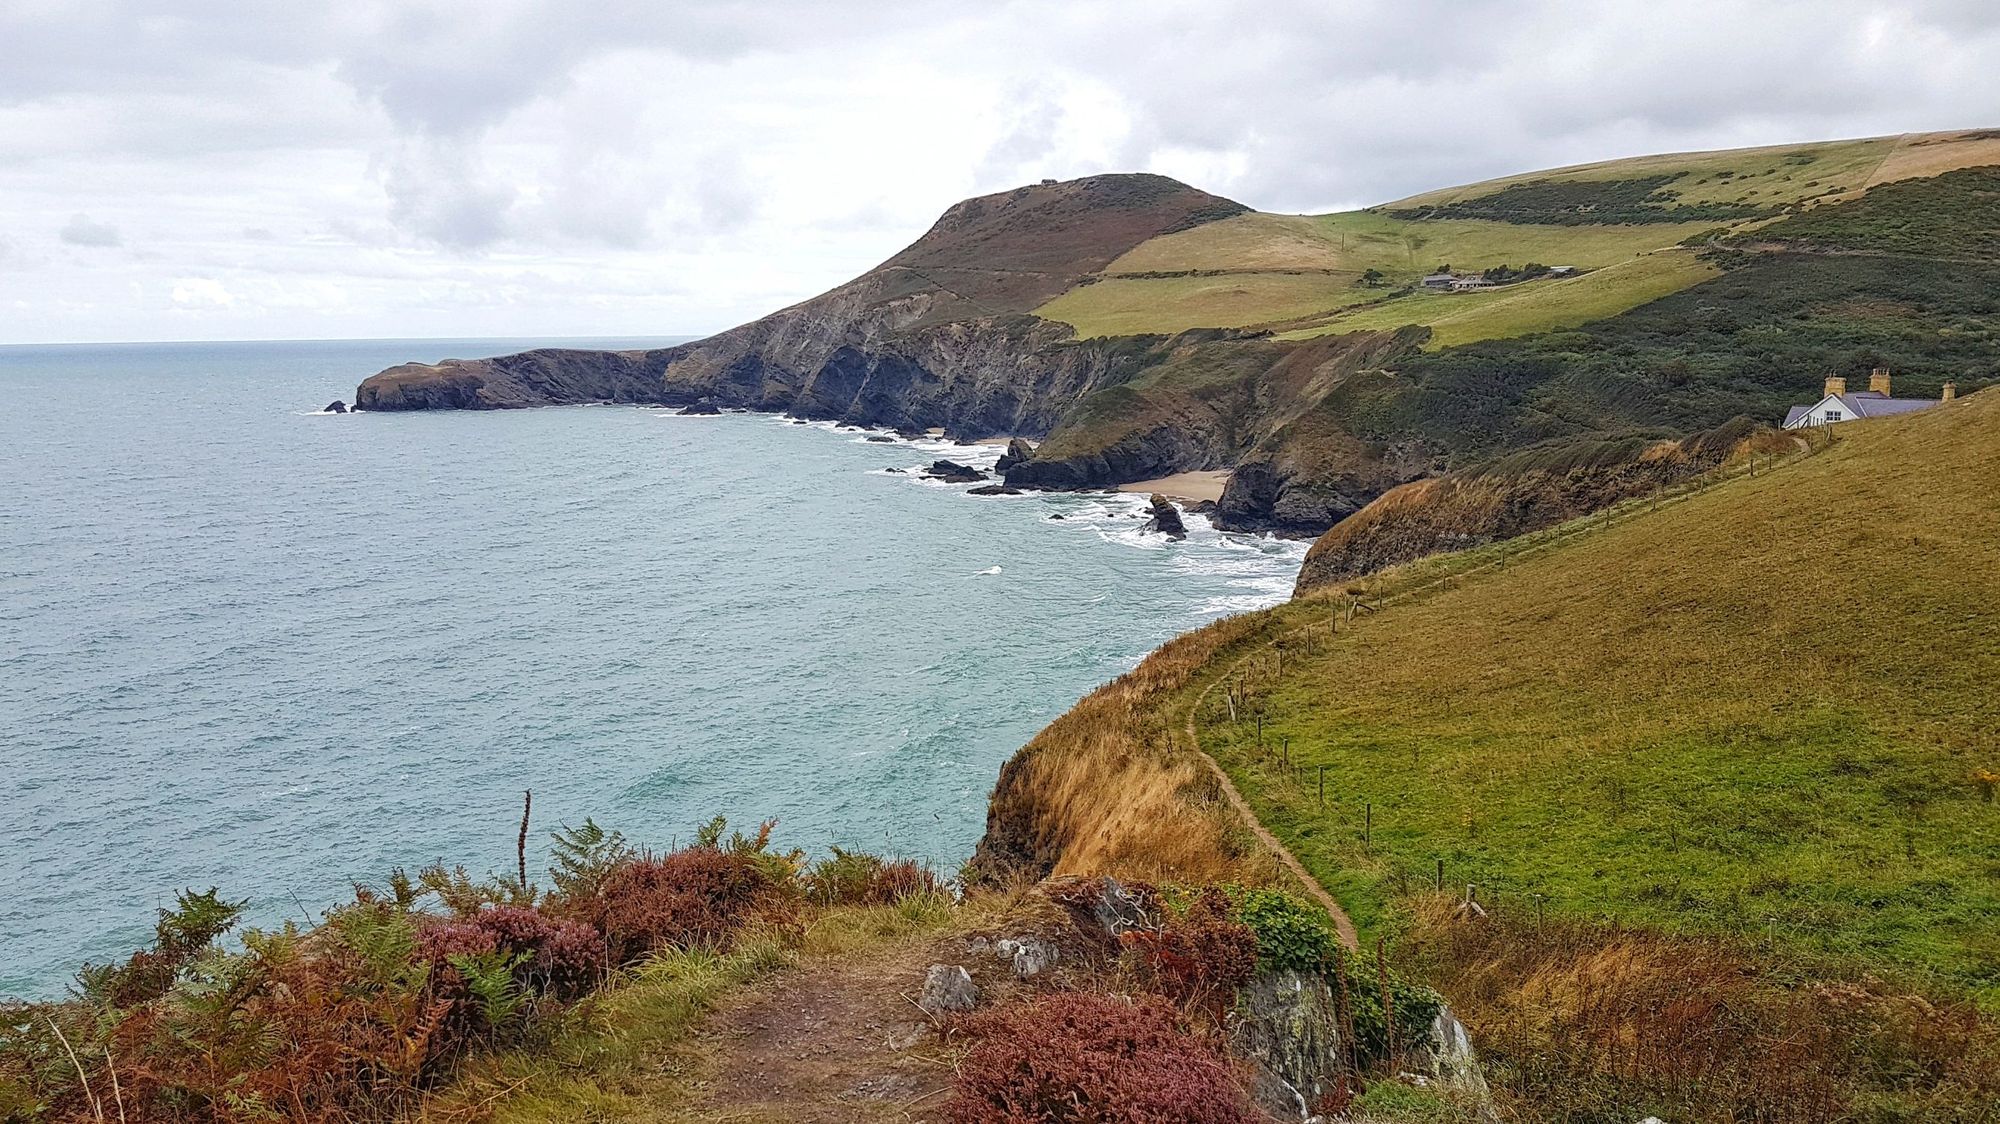 The coastline of Llangrannog, Wales, on a cloudy day.